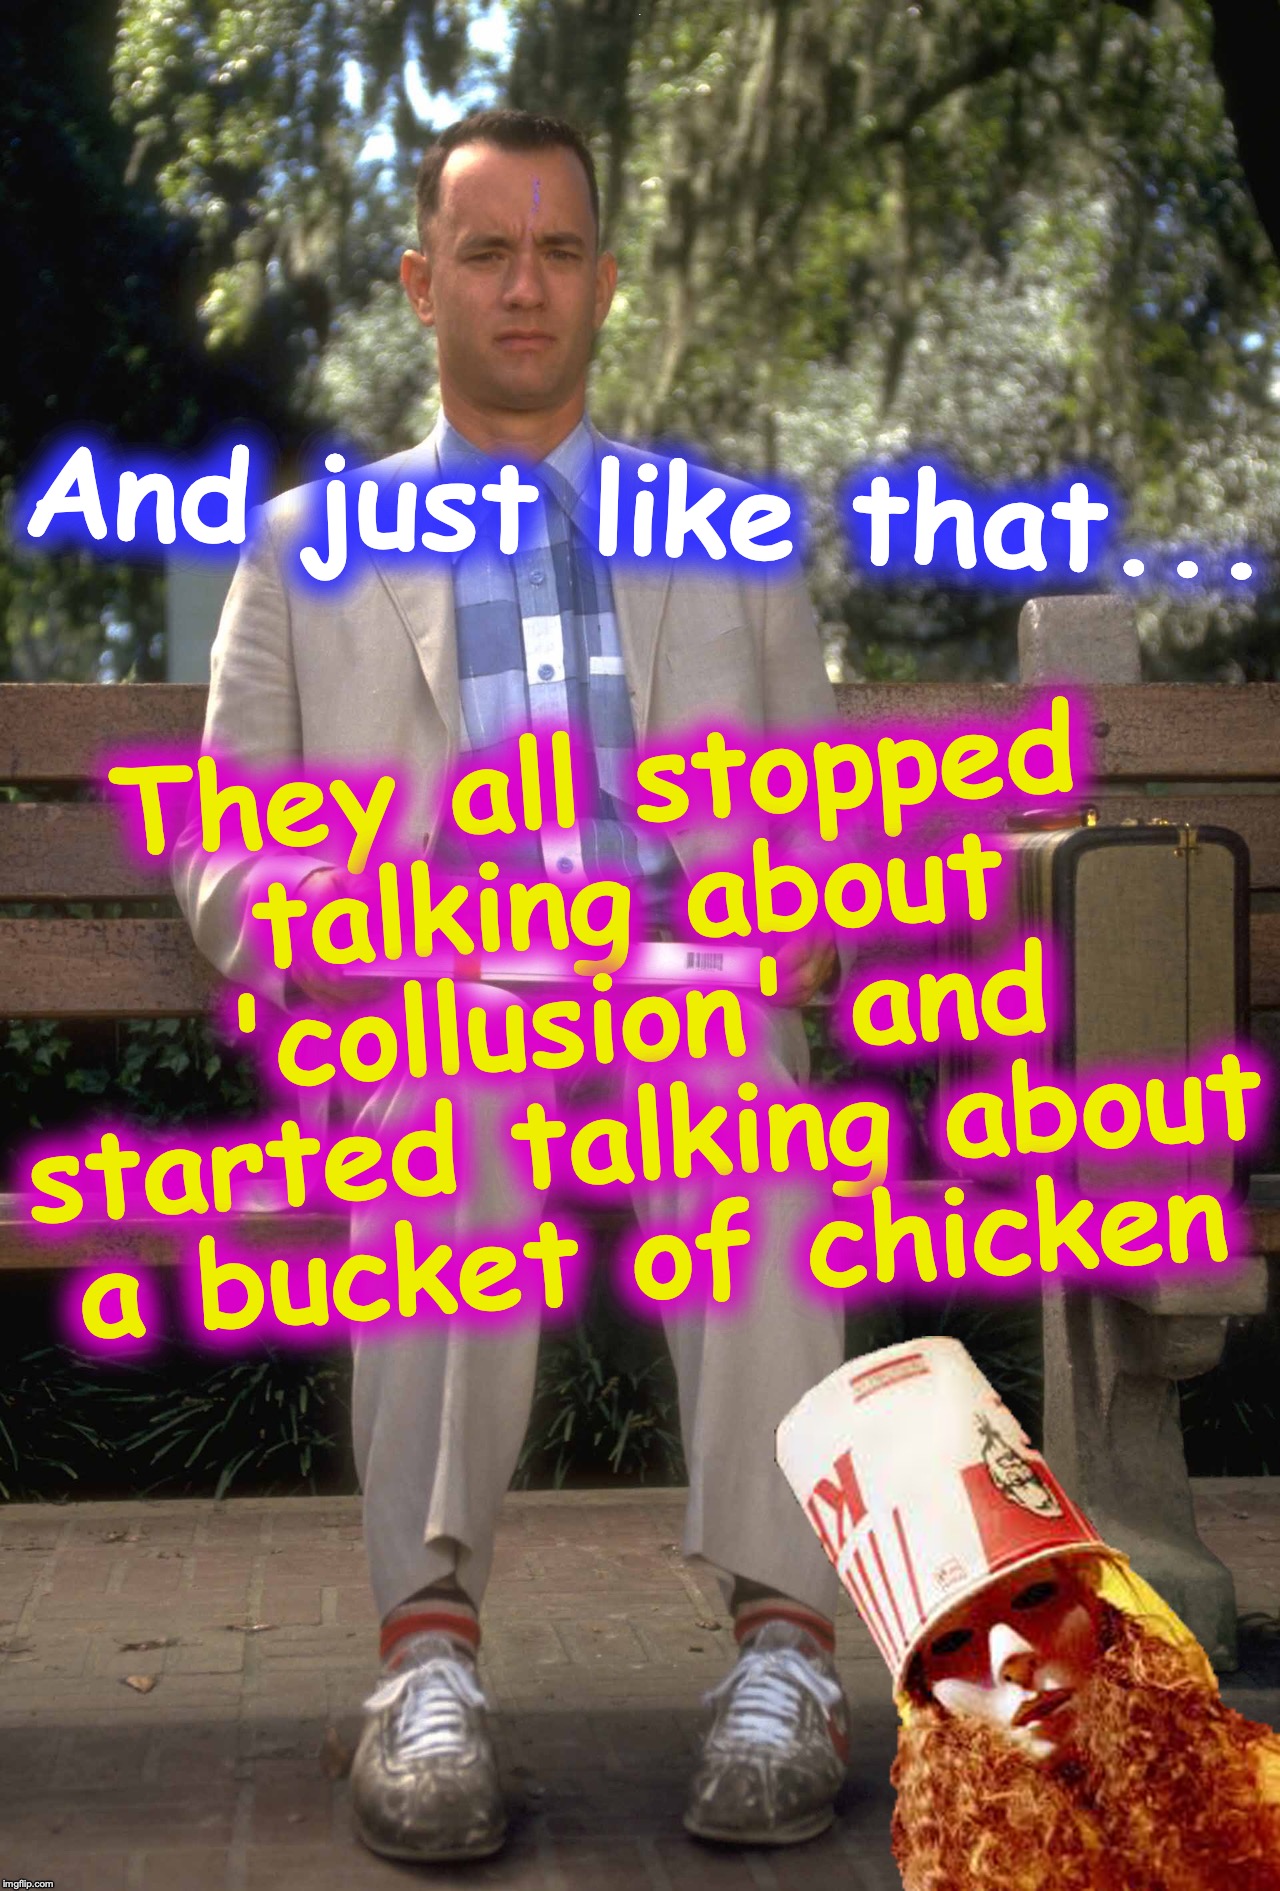 They all stopped talking about 'collusion' and started talking about a bucket of chicken; And just like that... | image tagged in chicken,collusion | made w/ Imgflip meme maker